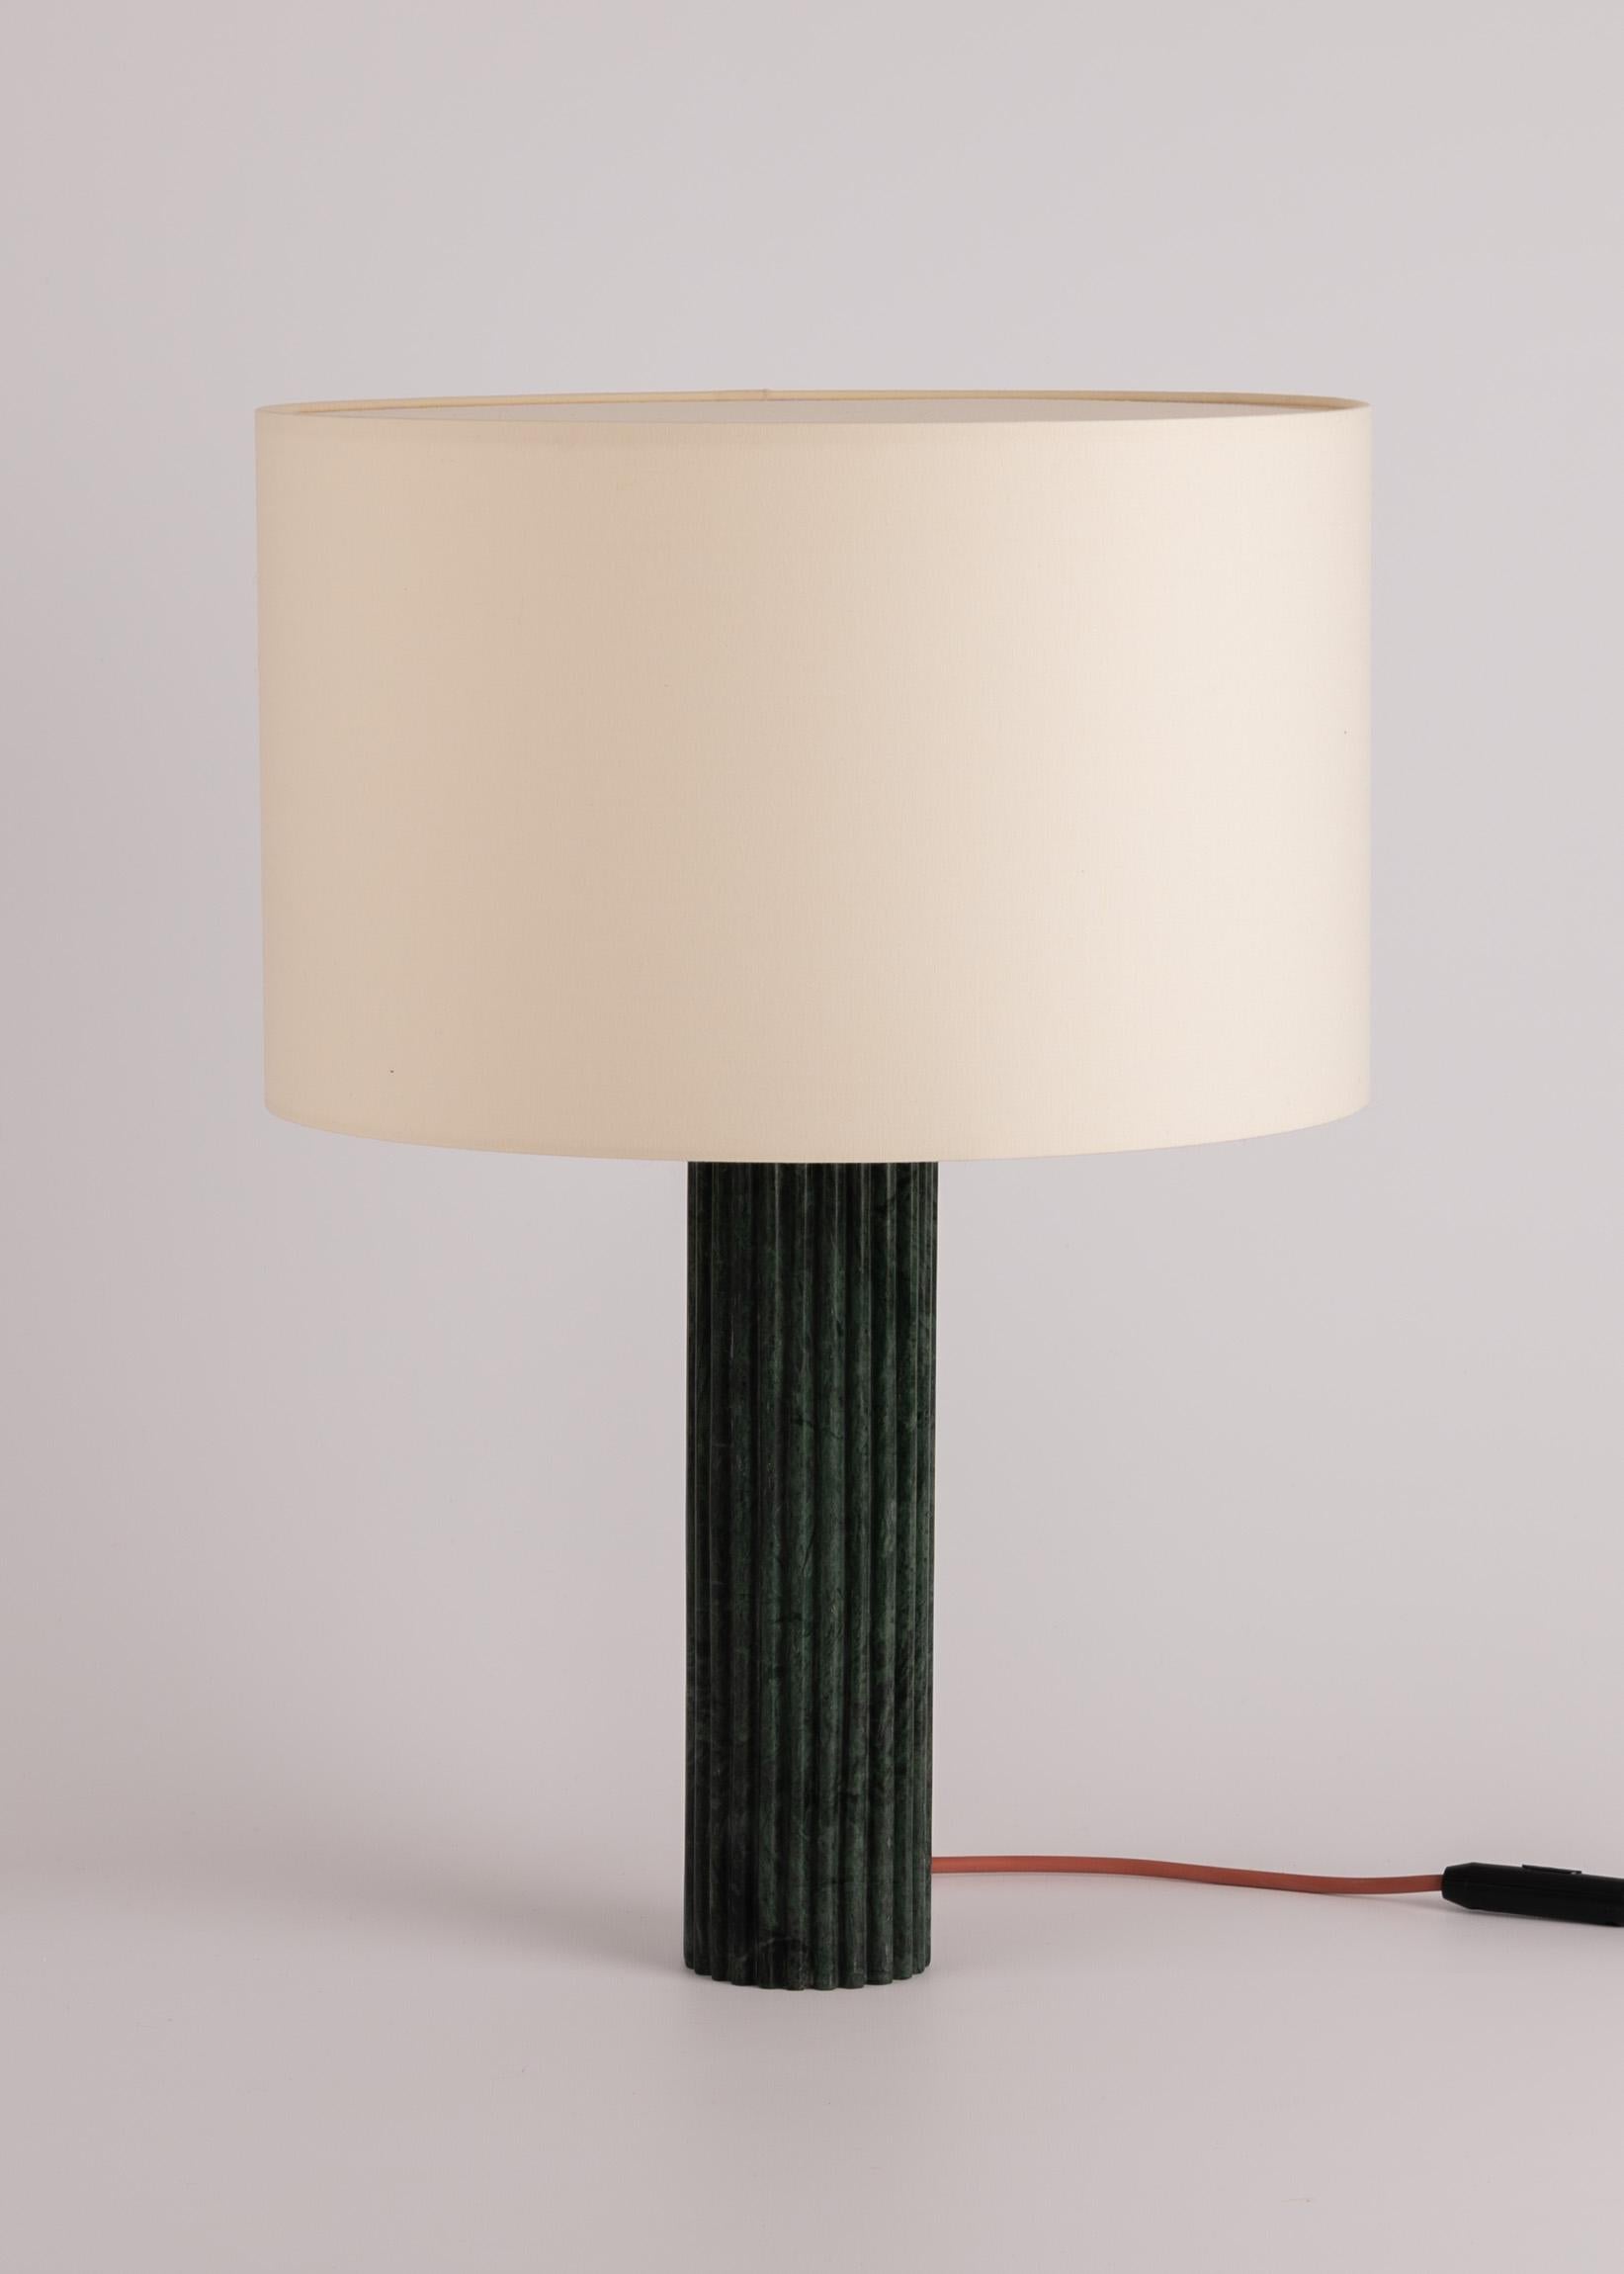 Green Marble Fluta Table Lamp by Simone & Marcel
Dimensions: Ø 40 x H 58 cm.
Materials: Cotton and green marble.

Also available in different marble and wood options and finishes. Custom options available on request. Please contact us. 

All our